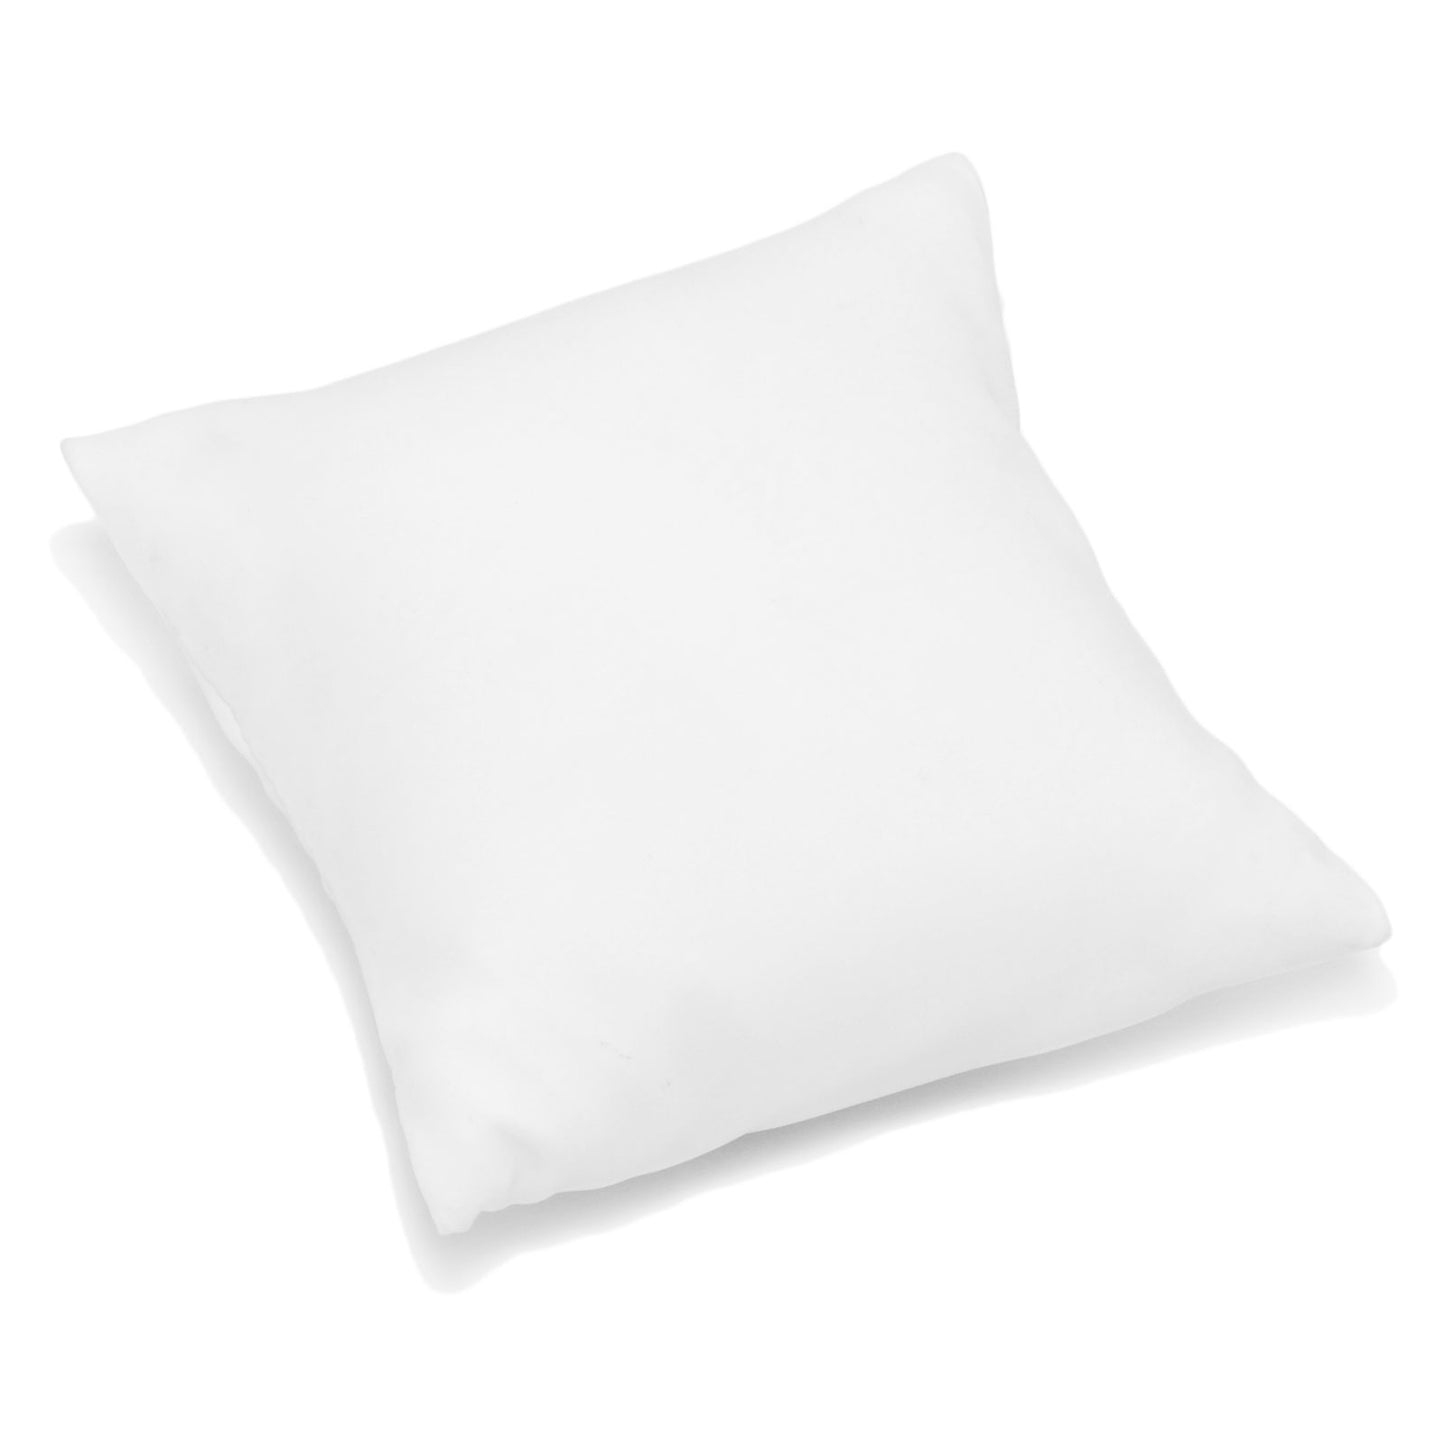 5" x 5" White Leatherette Pillow Jewelry Display for Bracelets or Watches